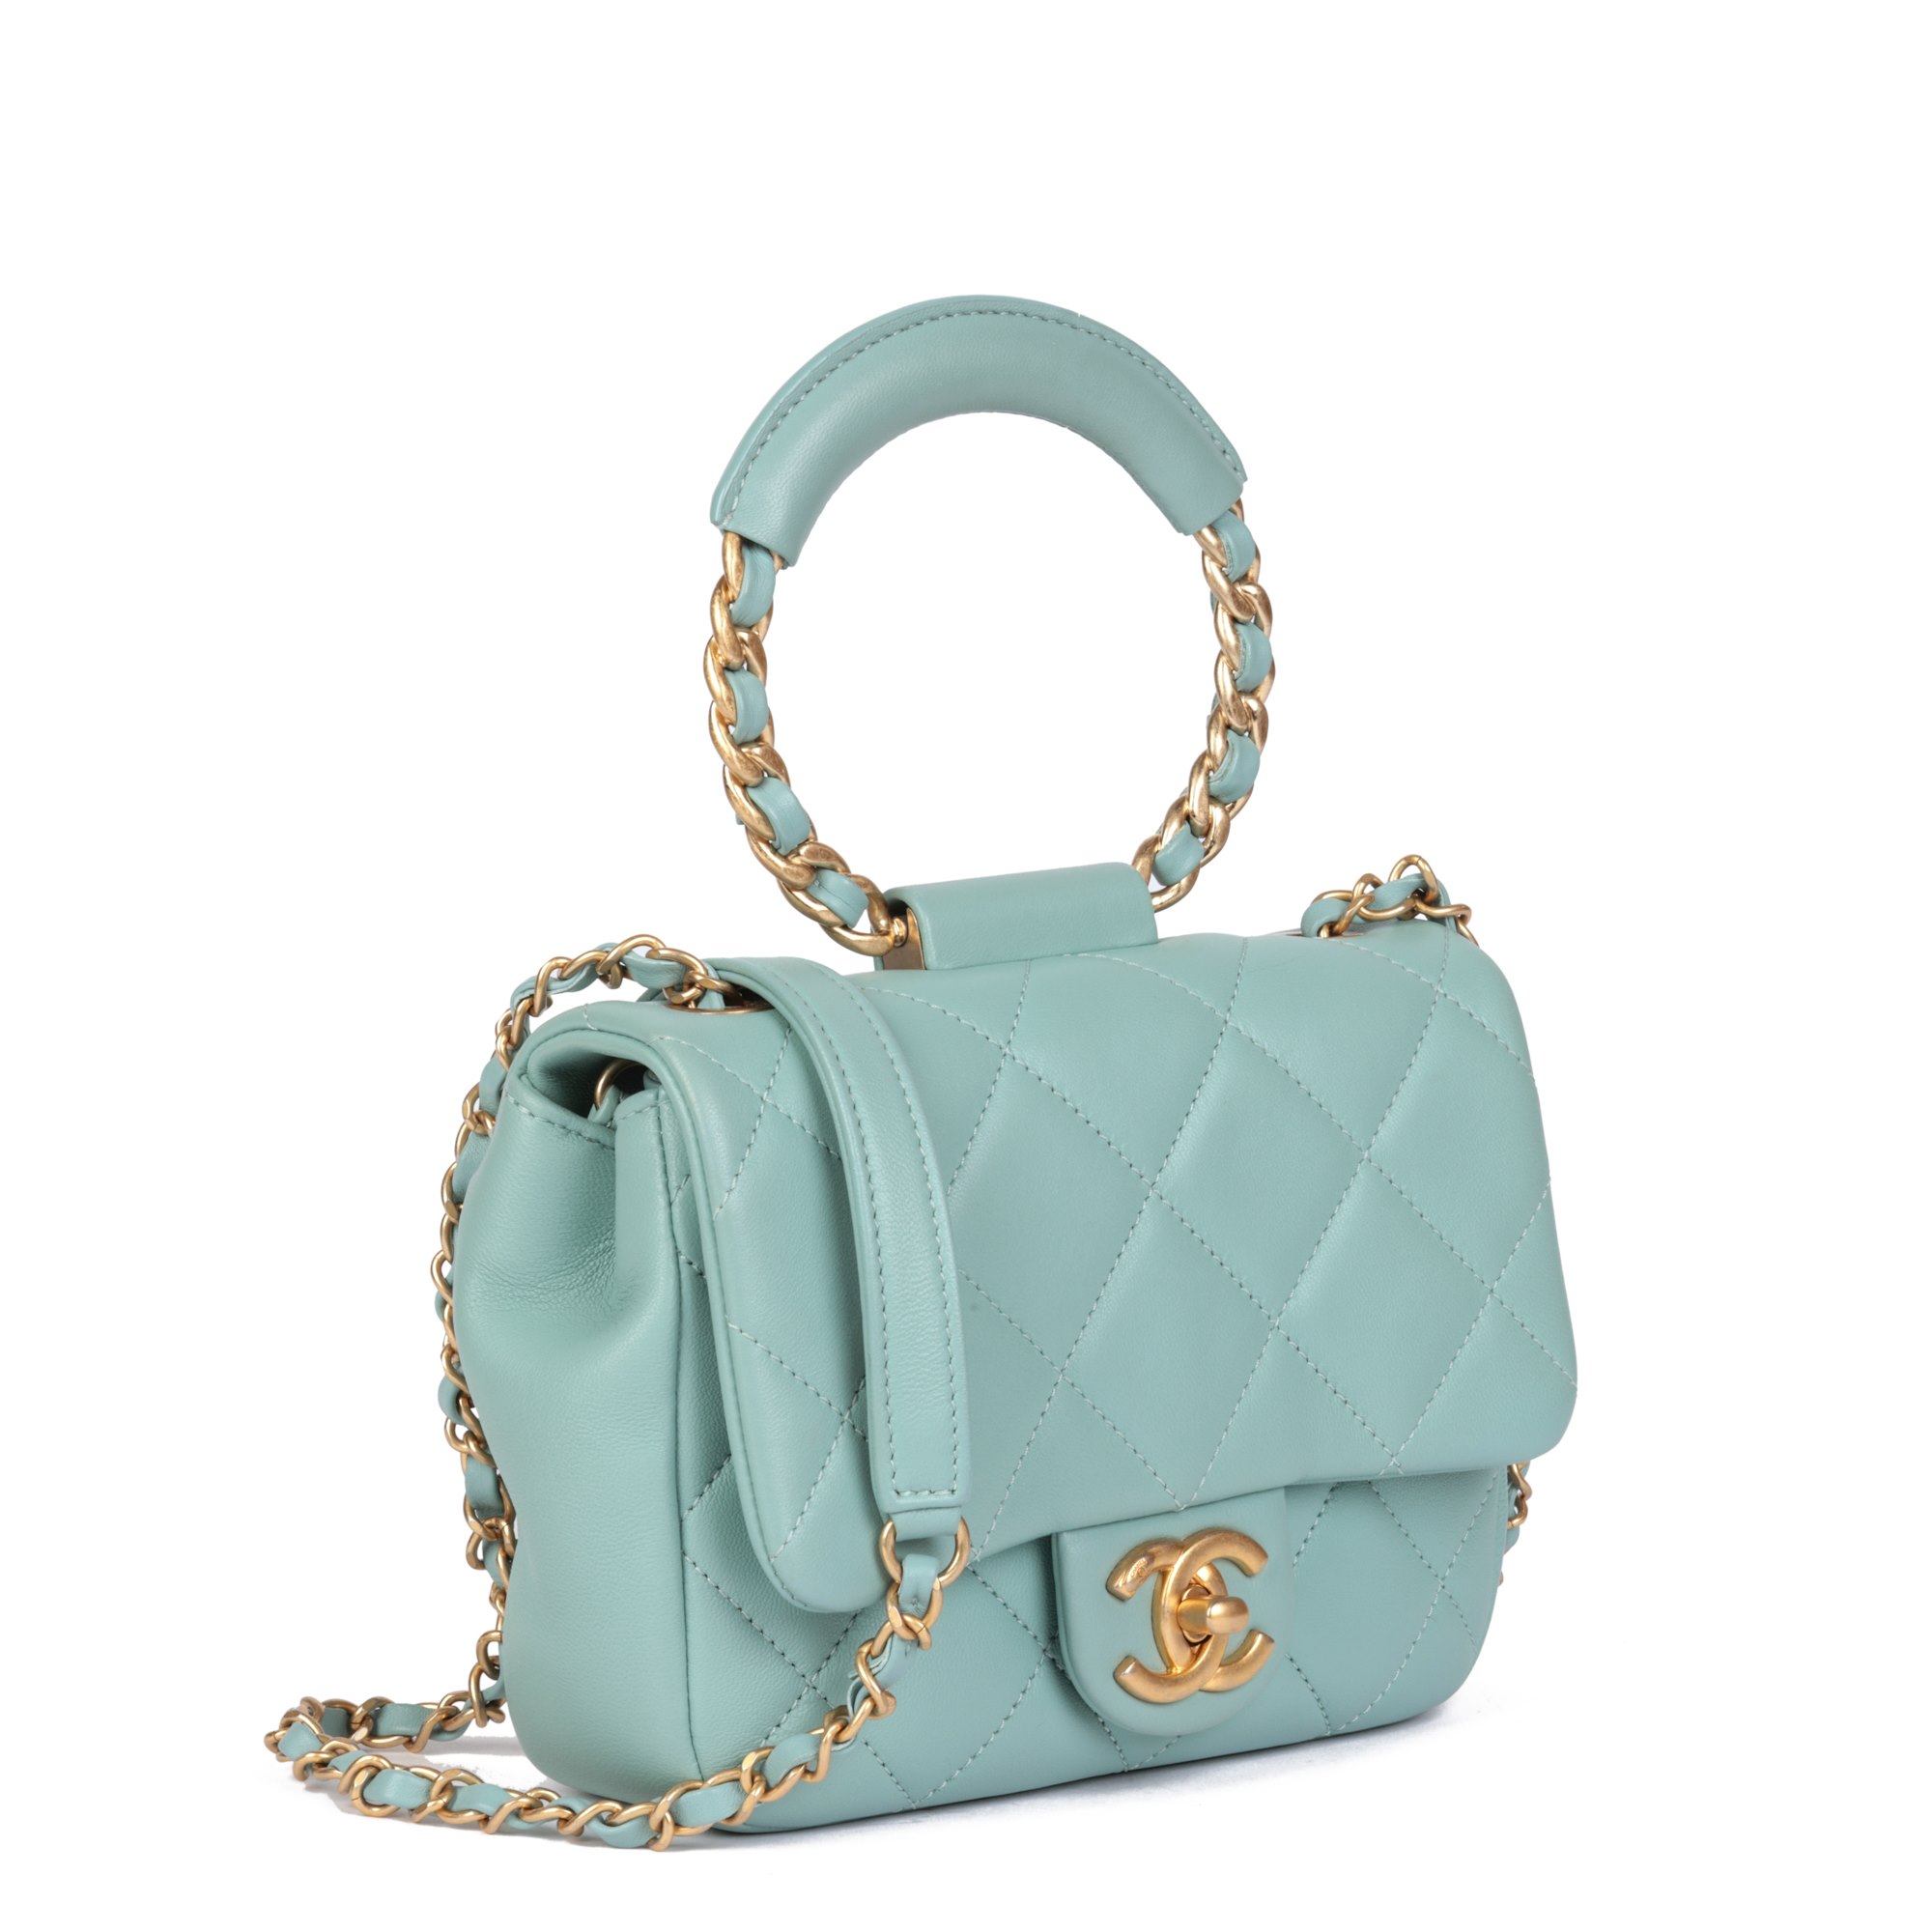 Chanel Pale Blue Quilted Lambskin In The Loop Top Handle Mini Flap Bag